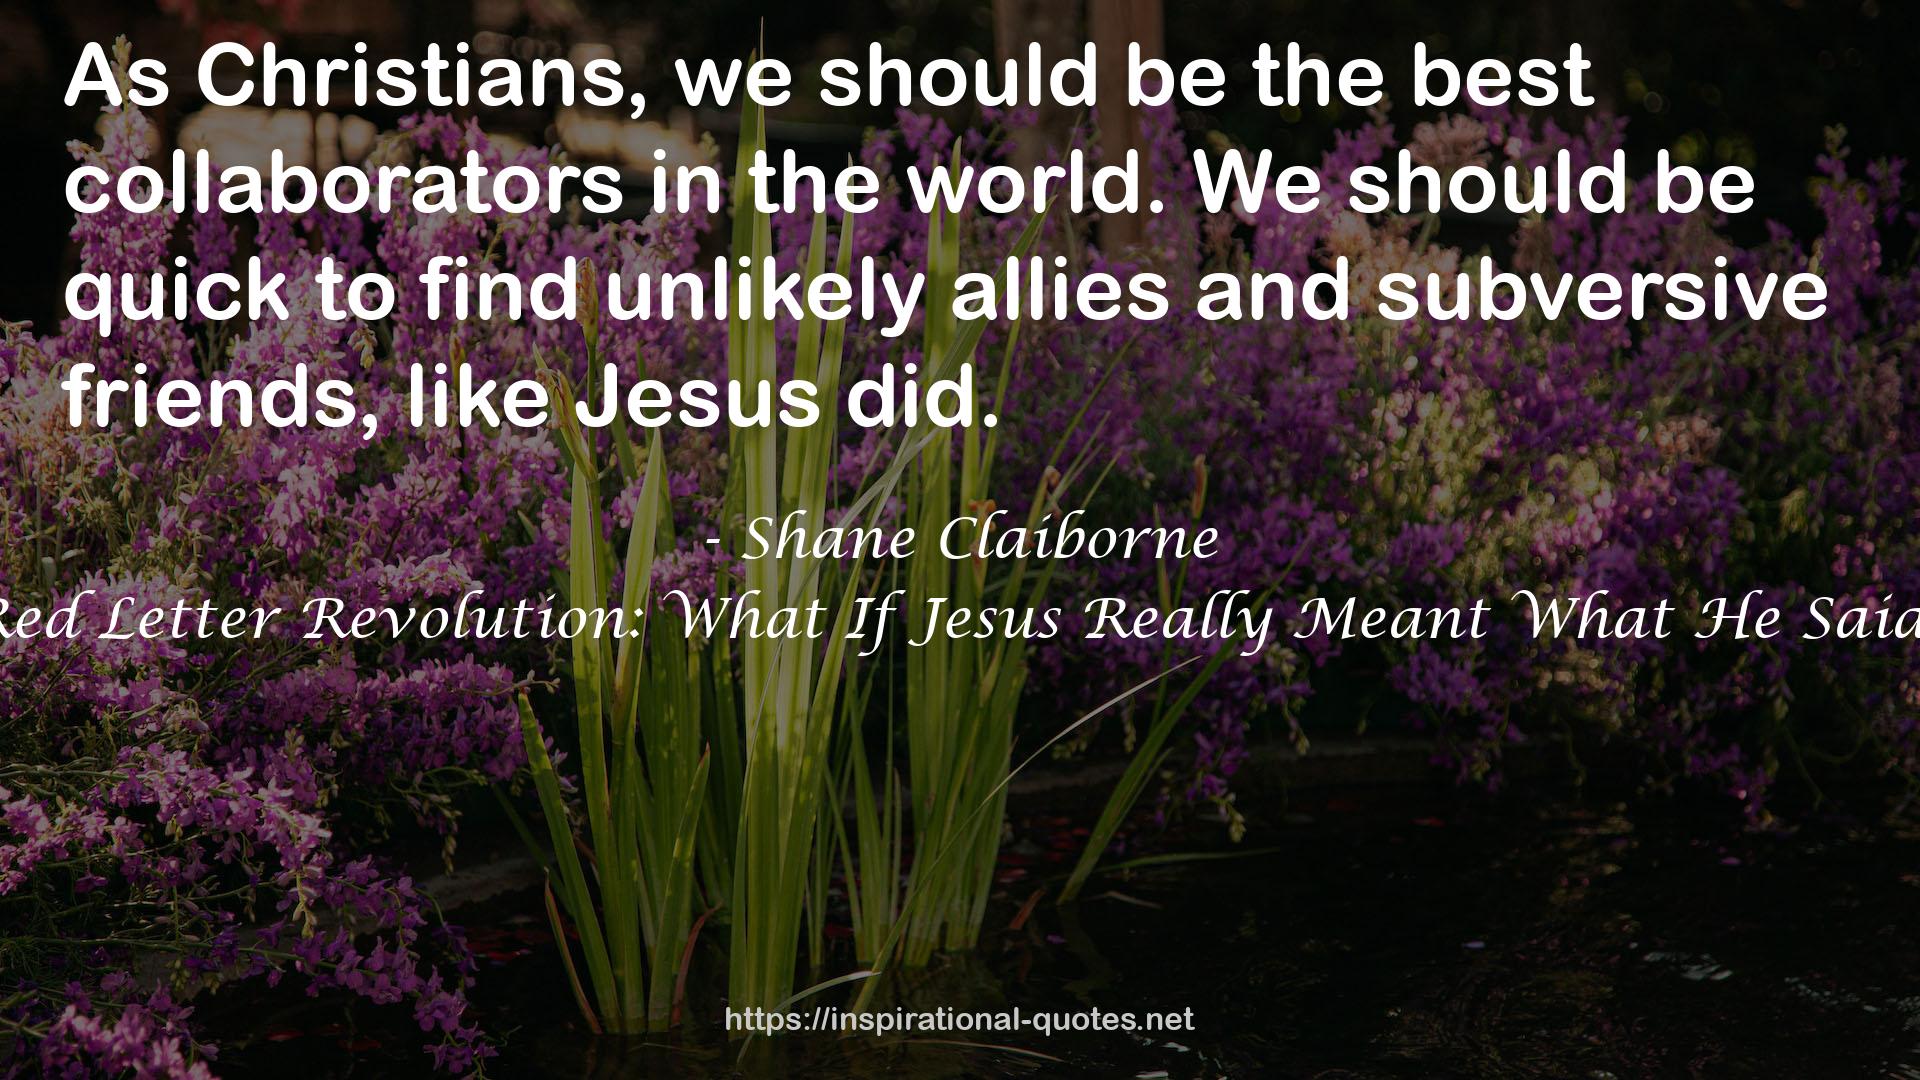 Red Letter Revolution: What If Jesus Really Meant What He Said? QUOTES